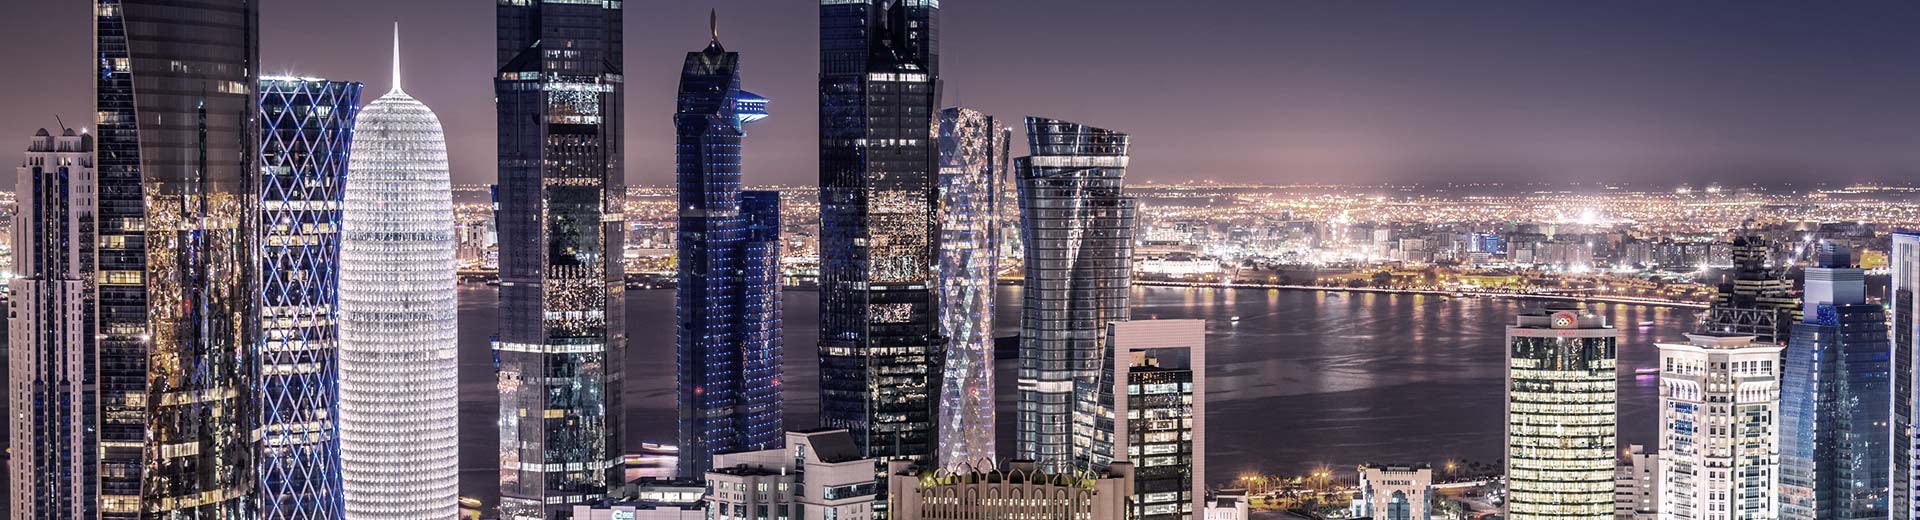 The varied and imposing skyscrapers of Doha pierce the nightsky .